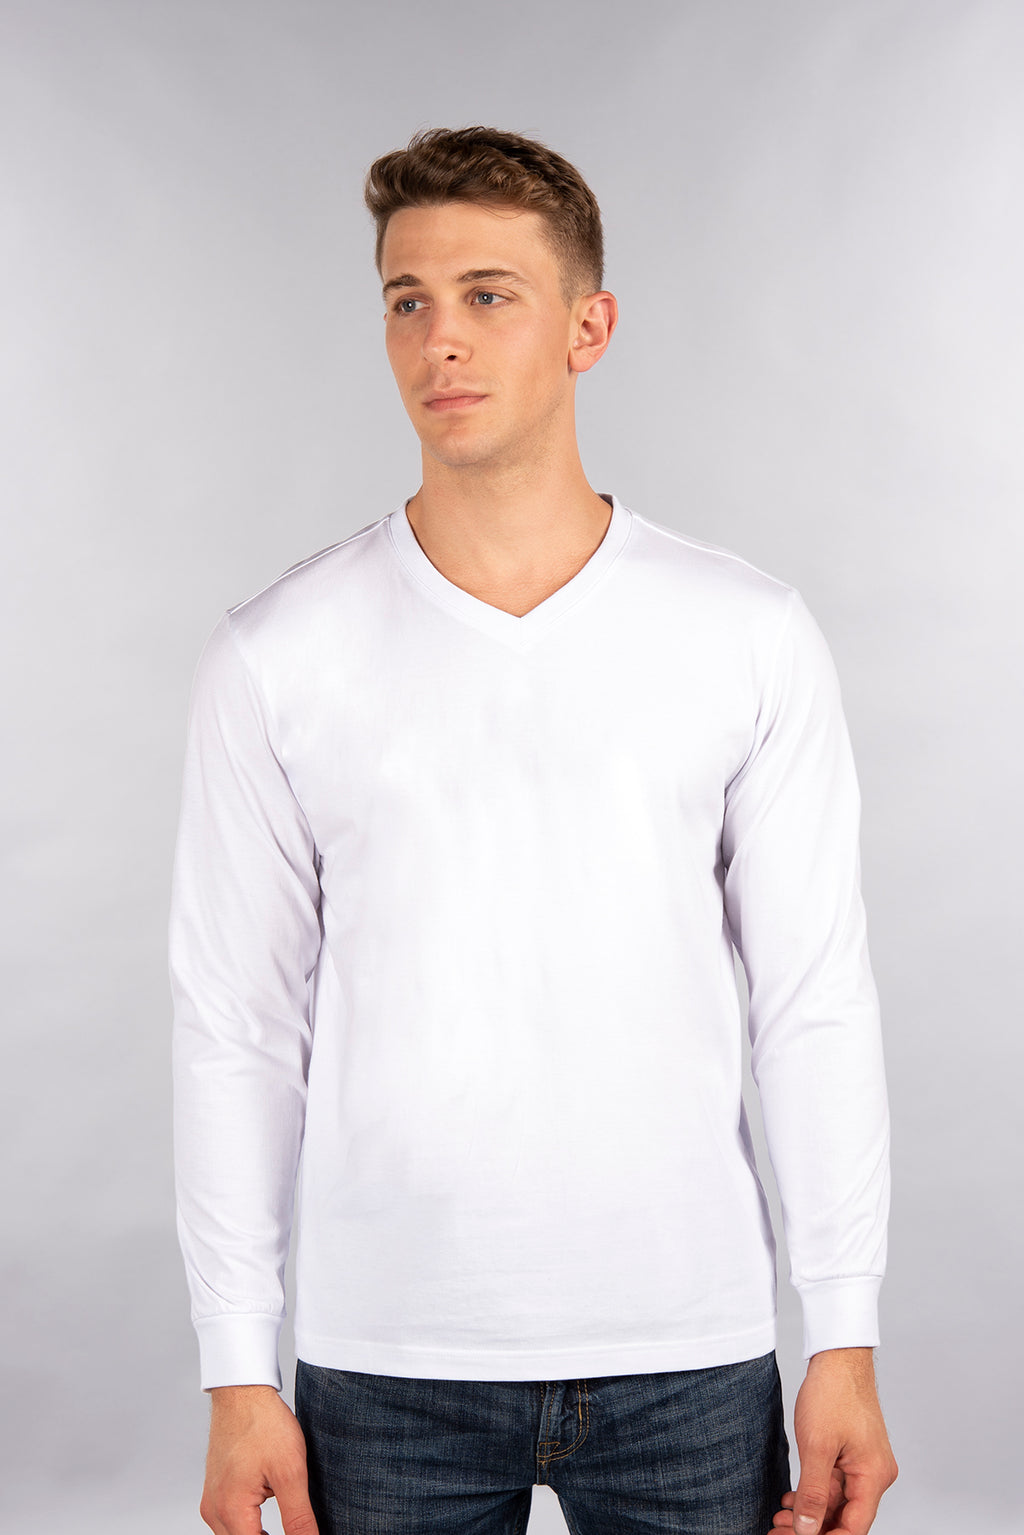 Fitted Long Sleeve Shirt, V